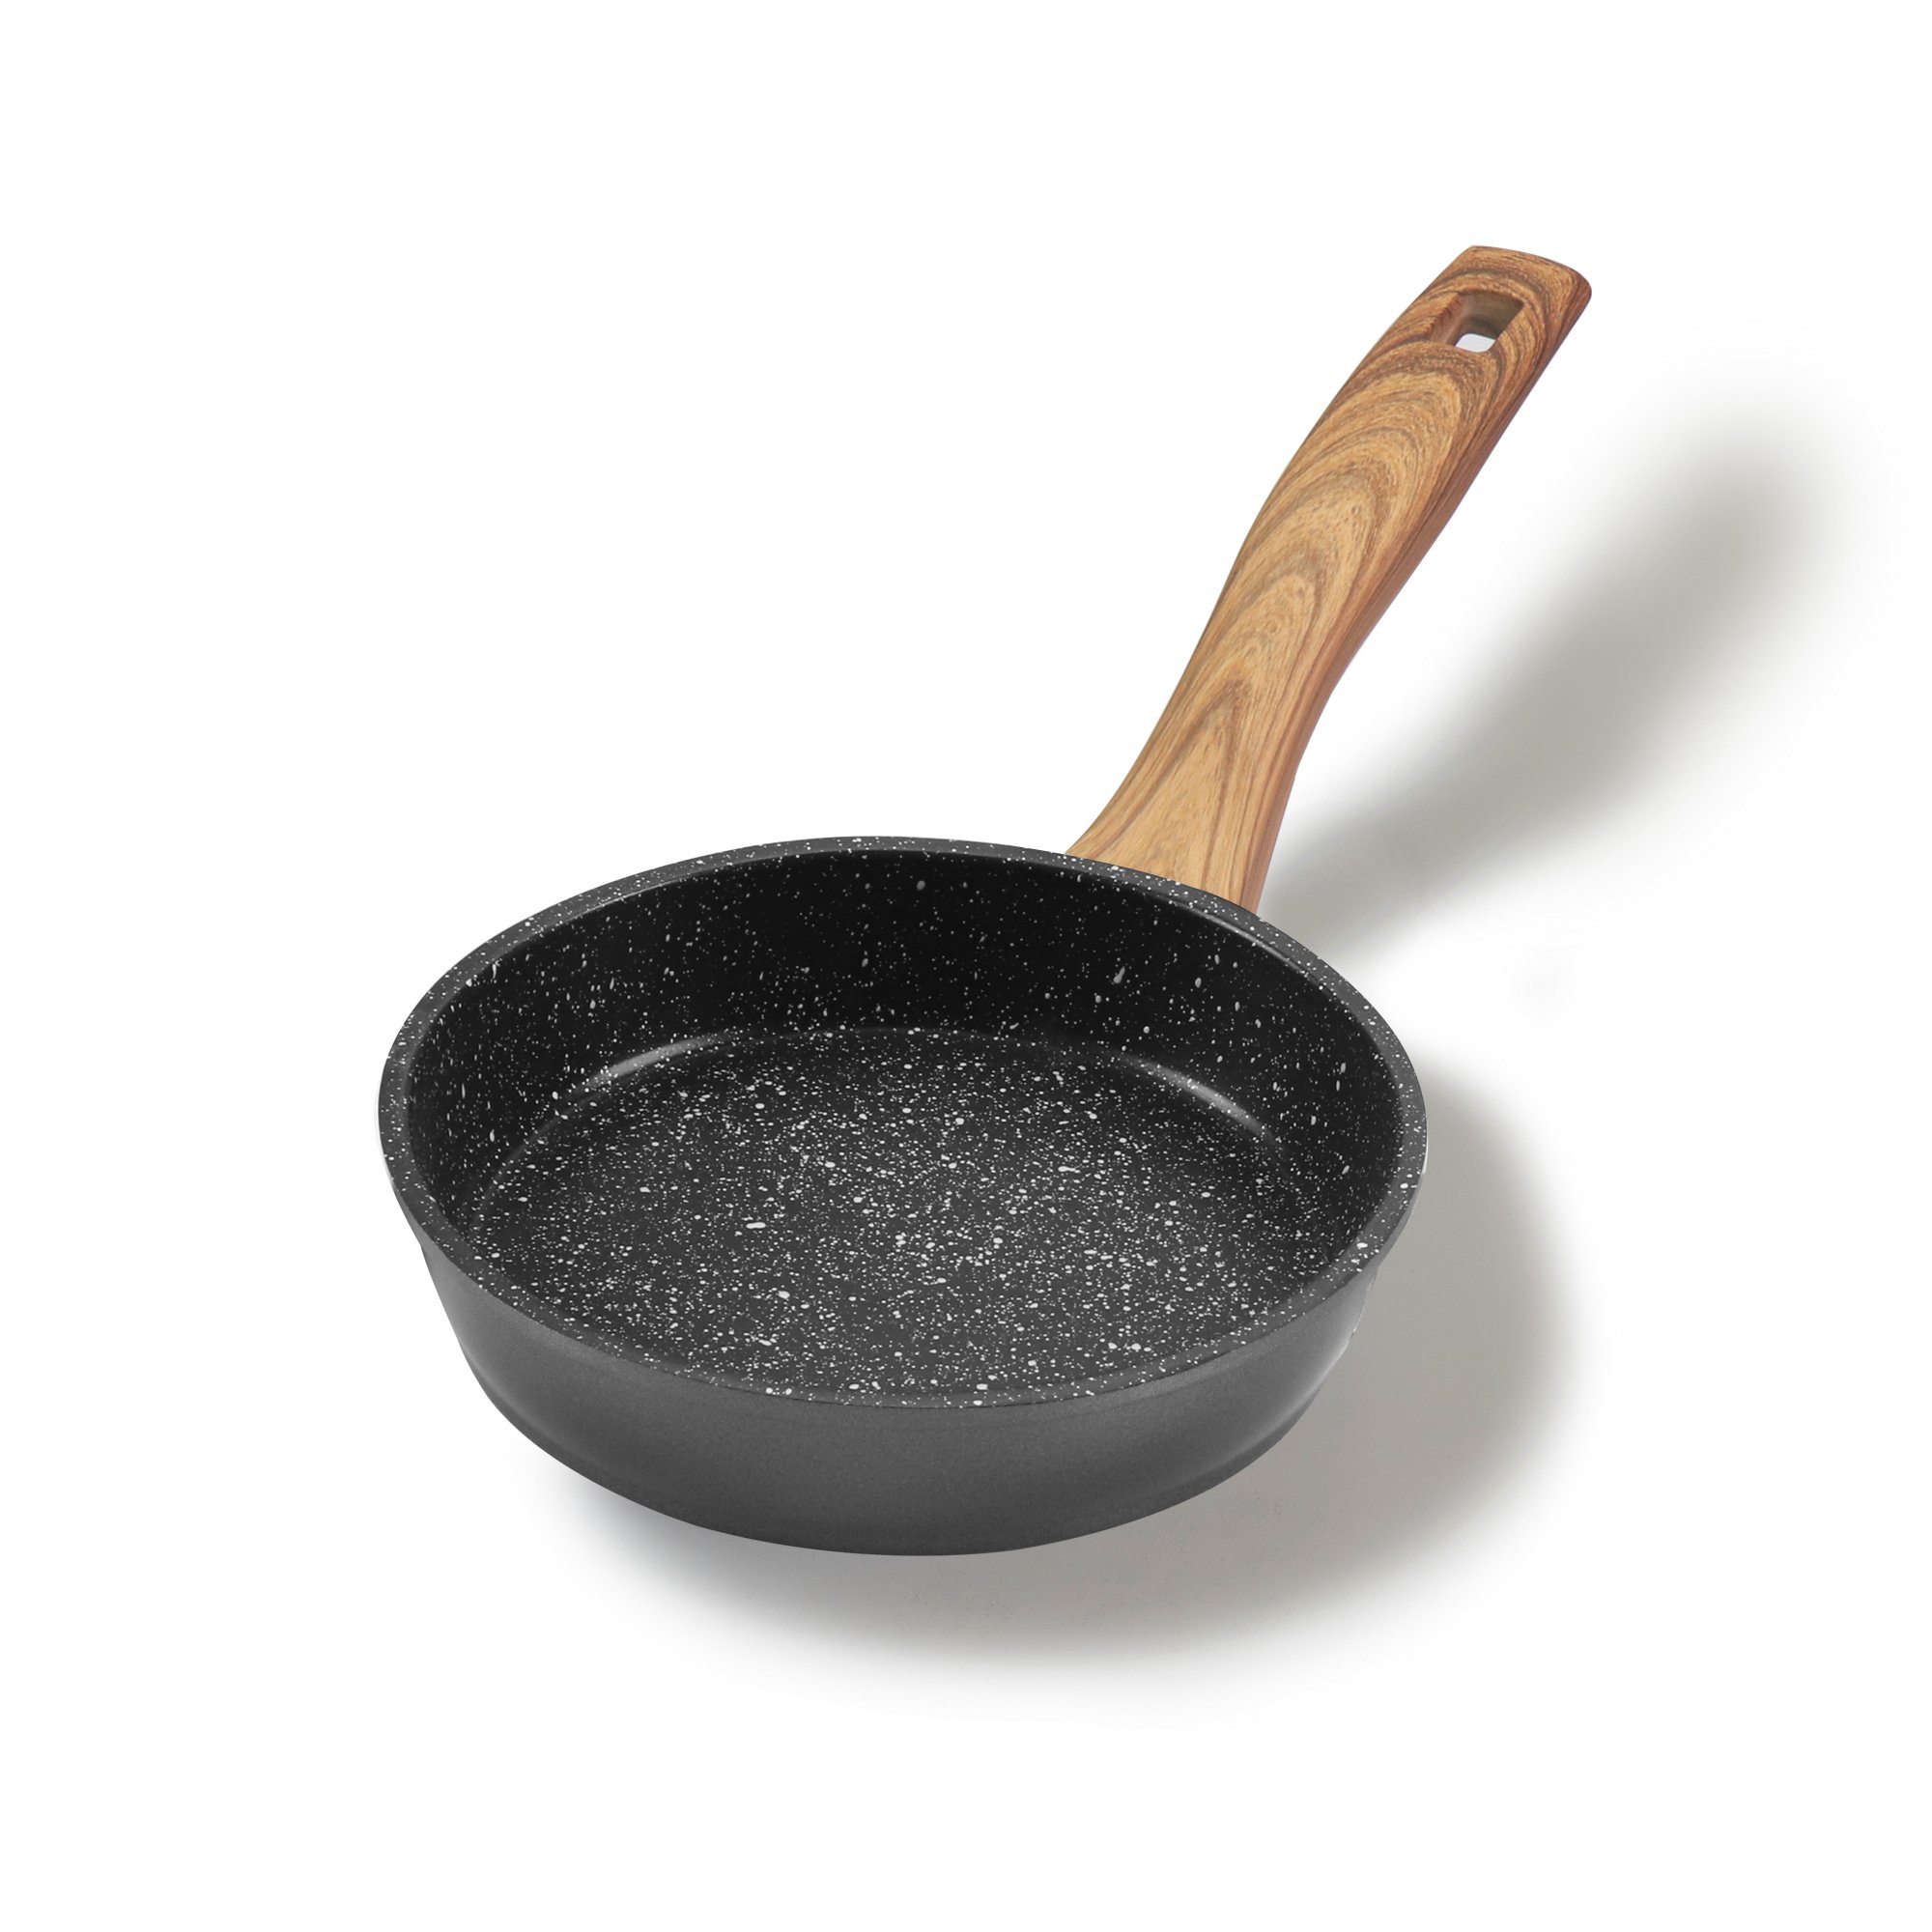 STONELINE® Frying Pan 14 cm, Non-Stick Pan, Wood Design | Back to Nature